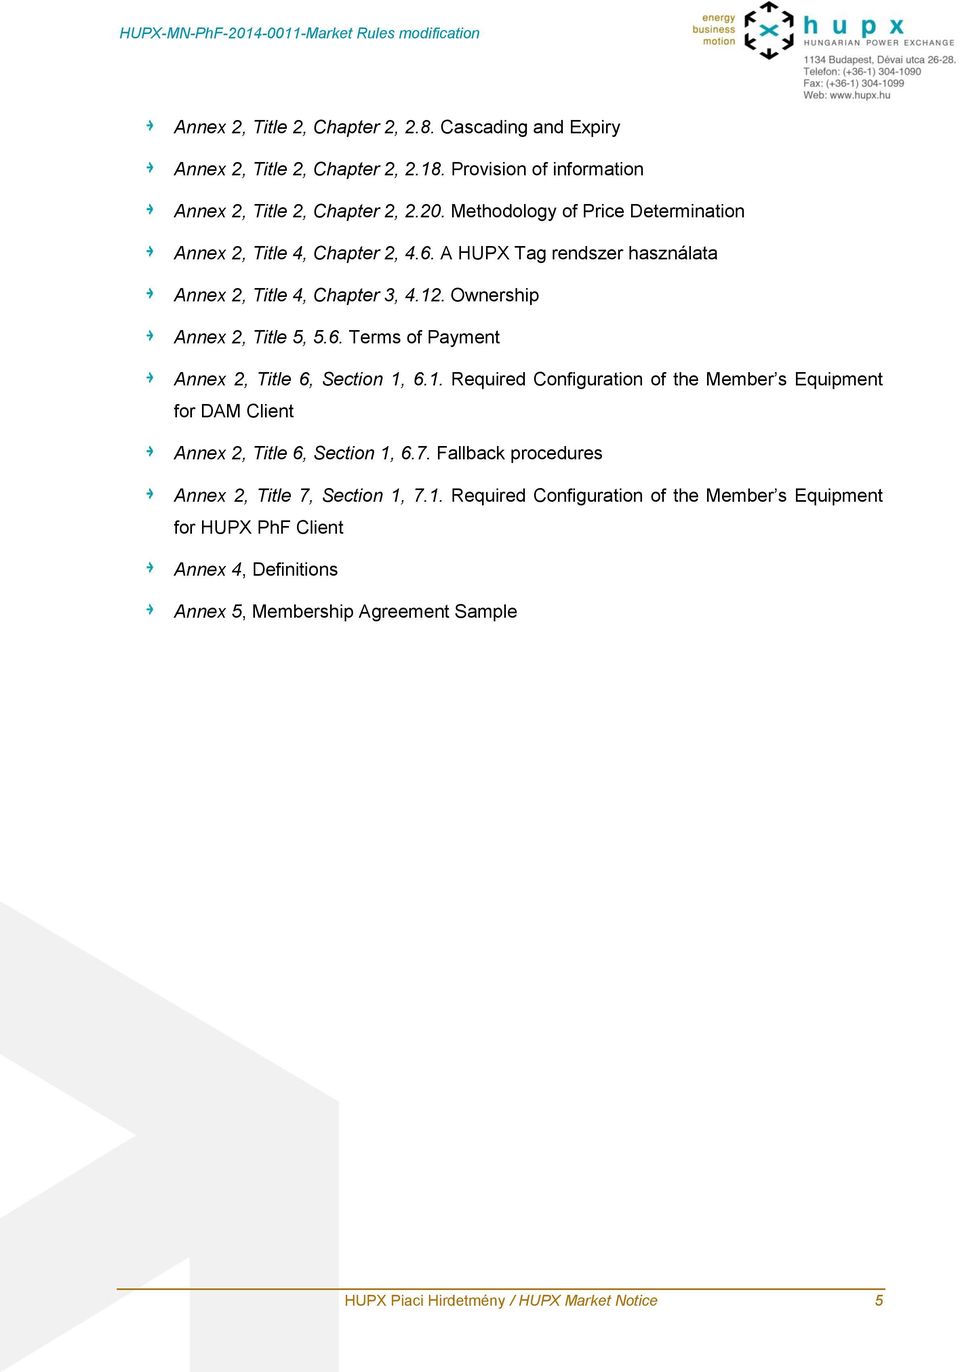 1. Required Configuration of the Member s Equipment for DAM Client Annex 2, Title 6, Section 1, 6.7. Fallback procedures Annex 2, Title 7, Section 1, 7.1. Required